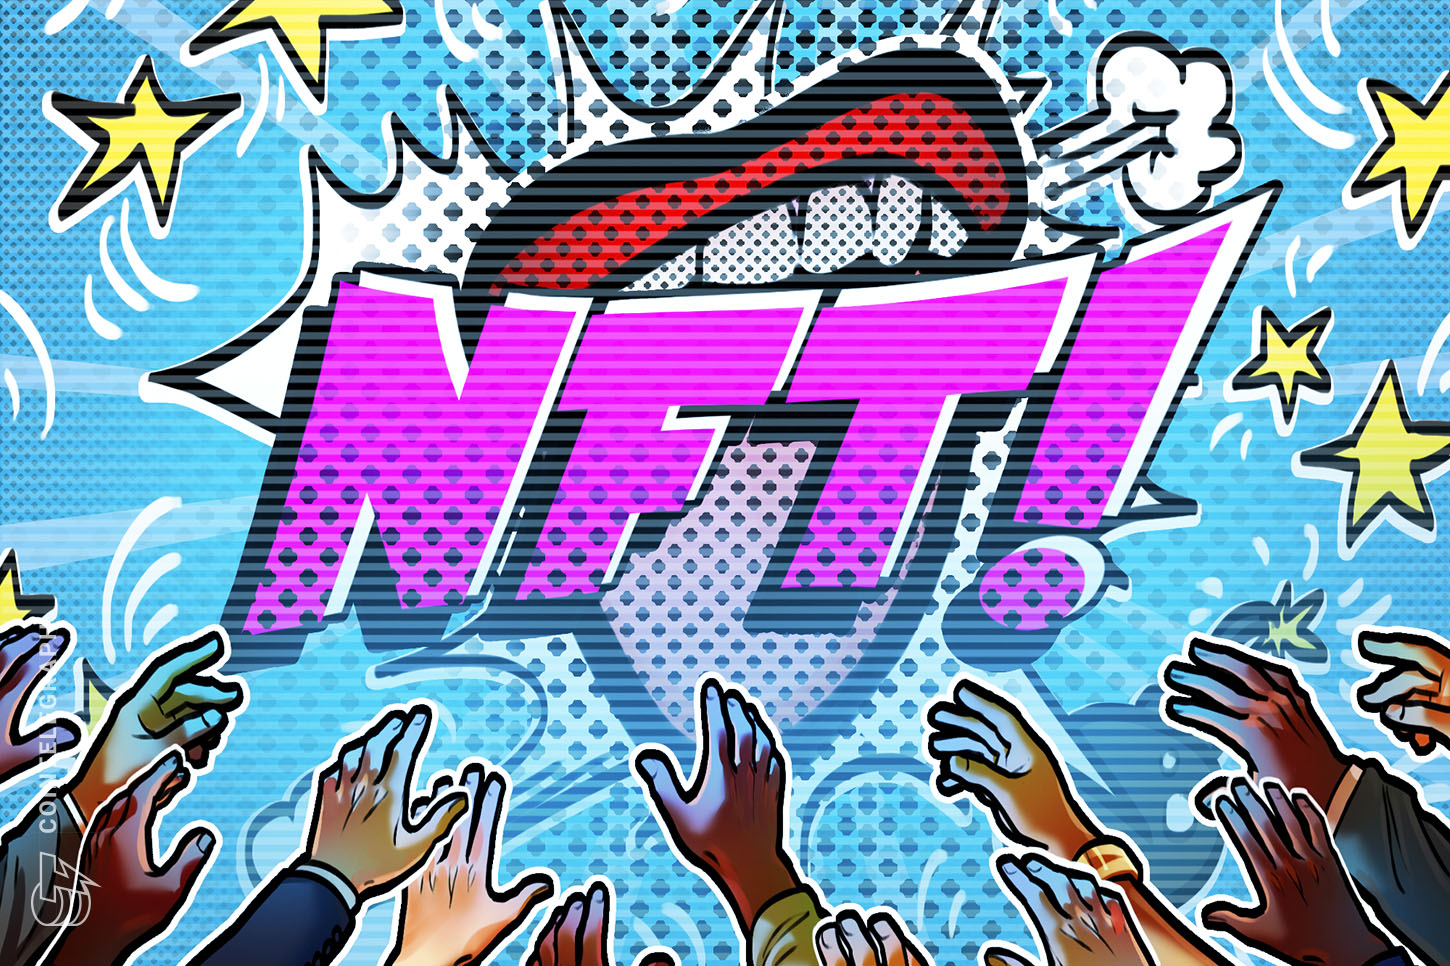 Nifty News: PROOF cancels NFT conference, Bitcoin meme creator cashes in $150K and more